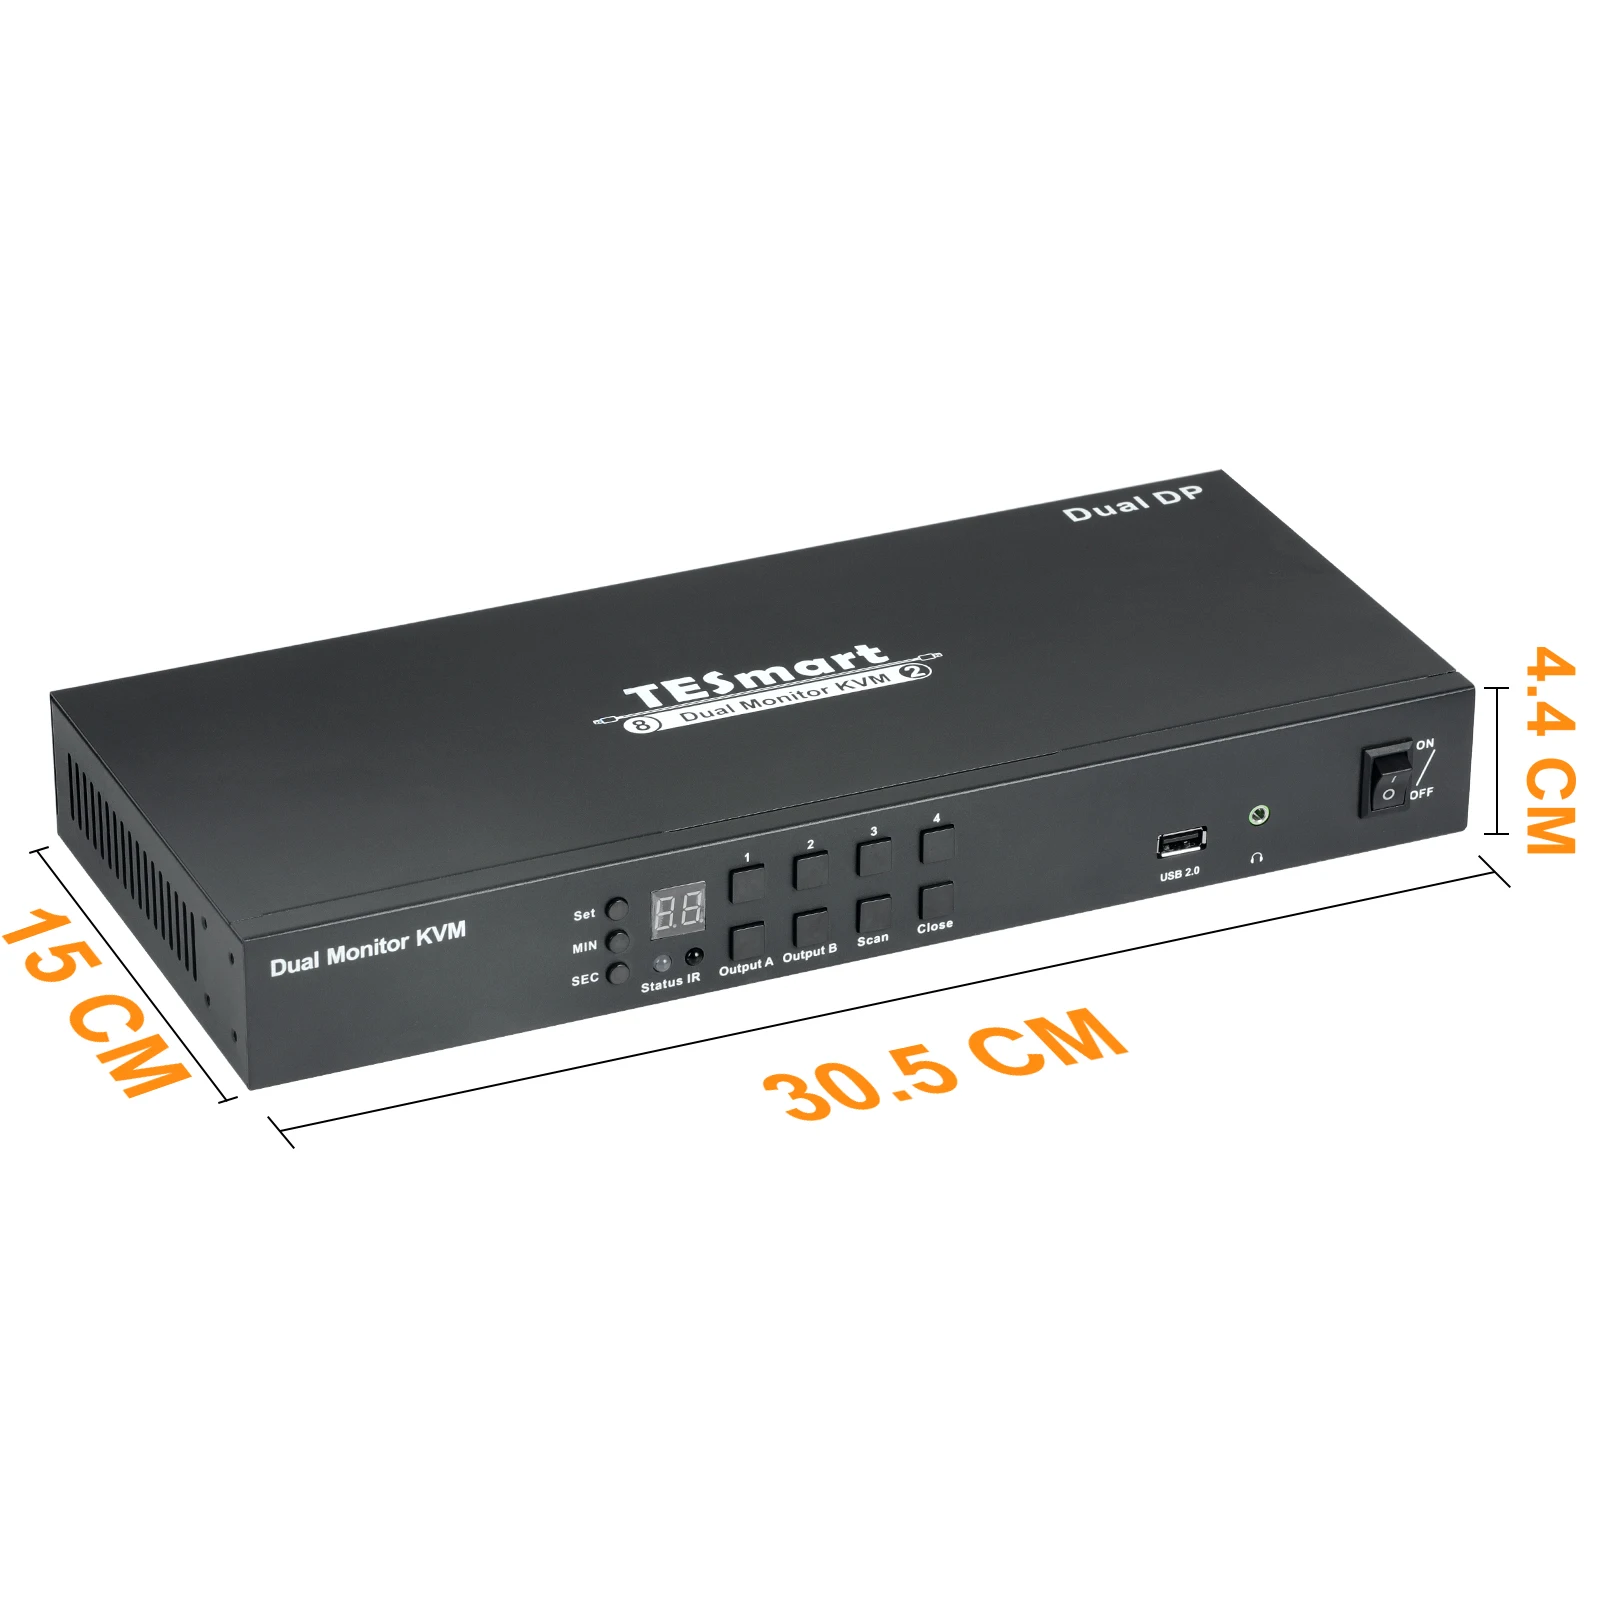 

DP Dual Monitor KVM Switch Support Resolution Up To 3840*2160@60HZ 8x2 Dual Monitor KVM Switch